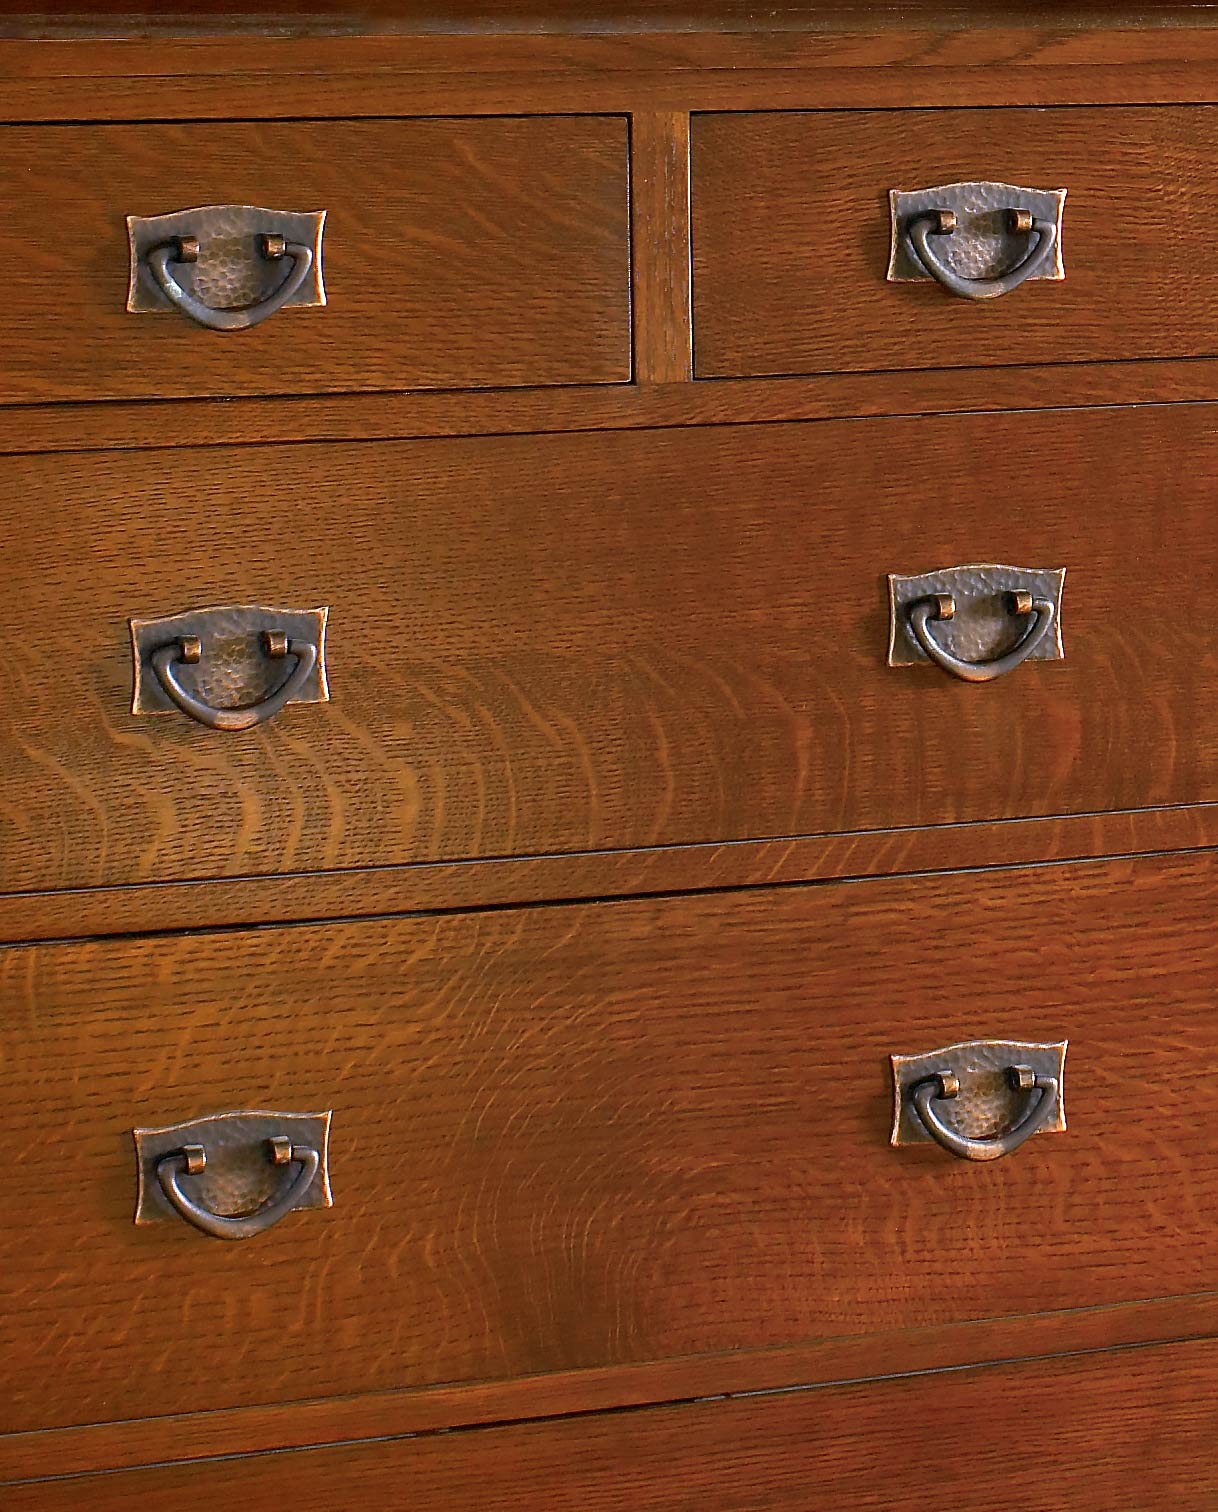 A closeup of an oak drawer front with dark copper bail pulls